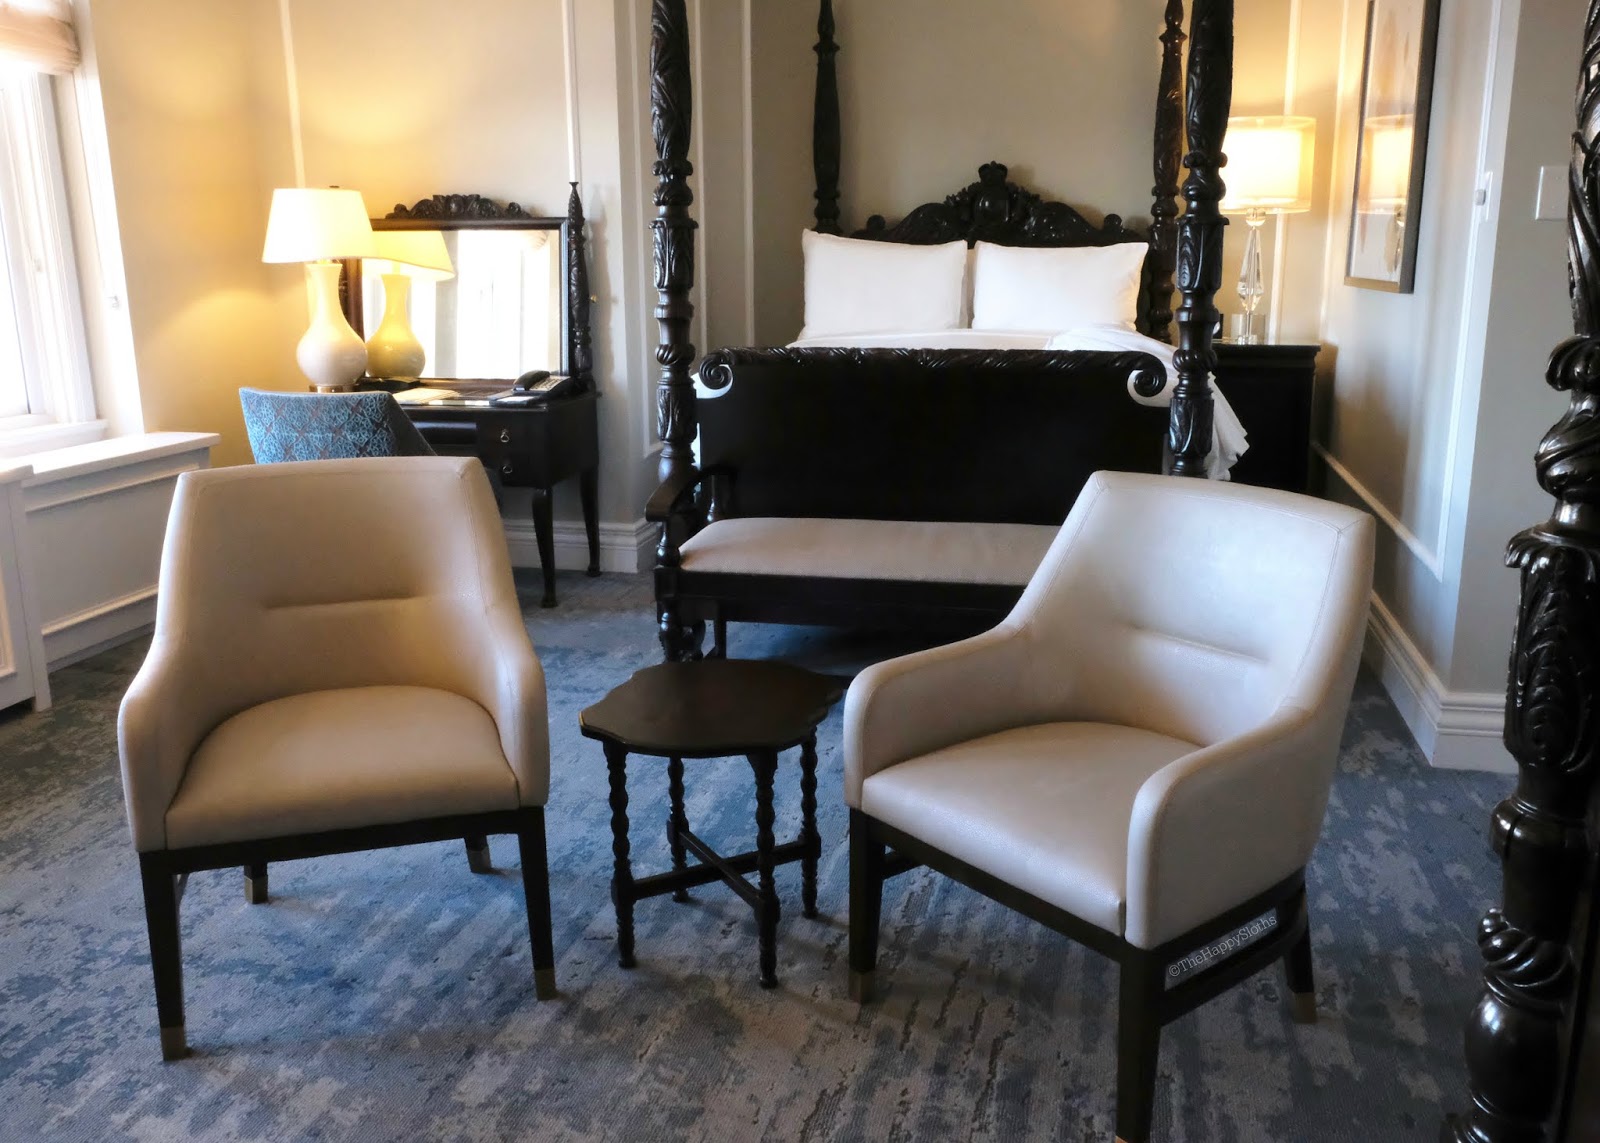 Fairmont Empress Hotel Review | Harbour View Deluxe Room